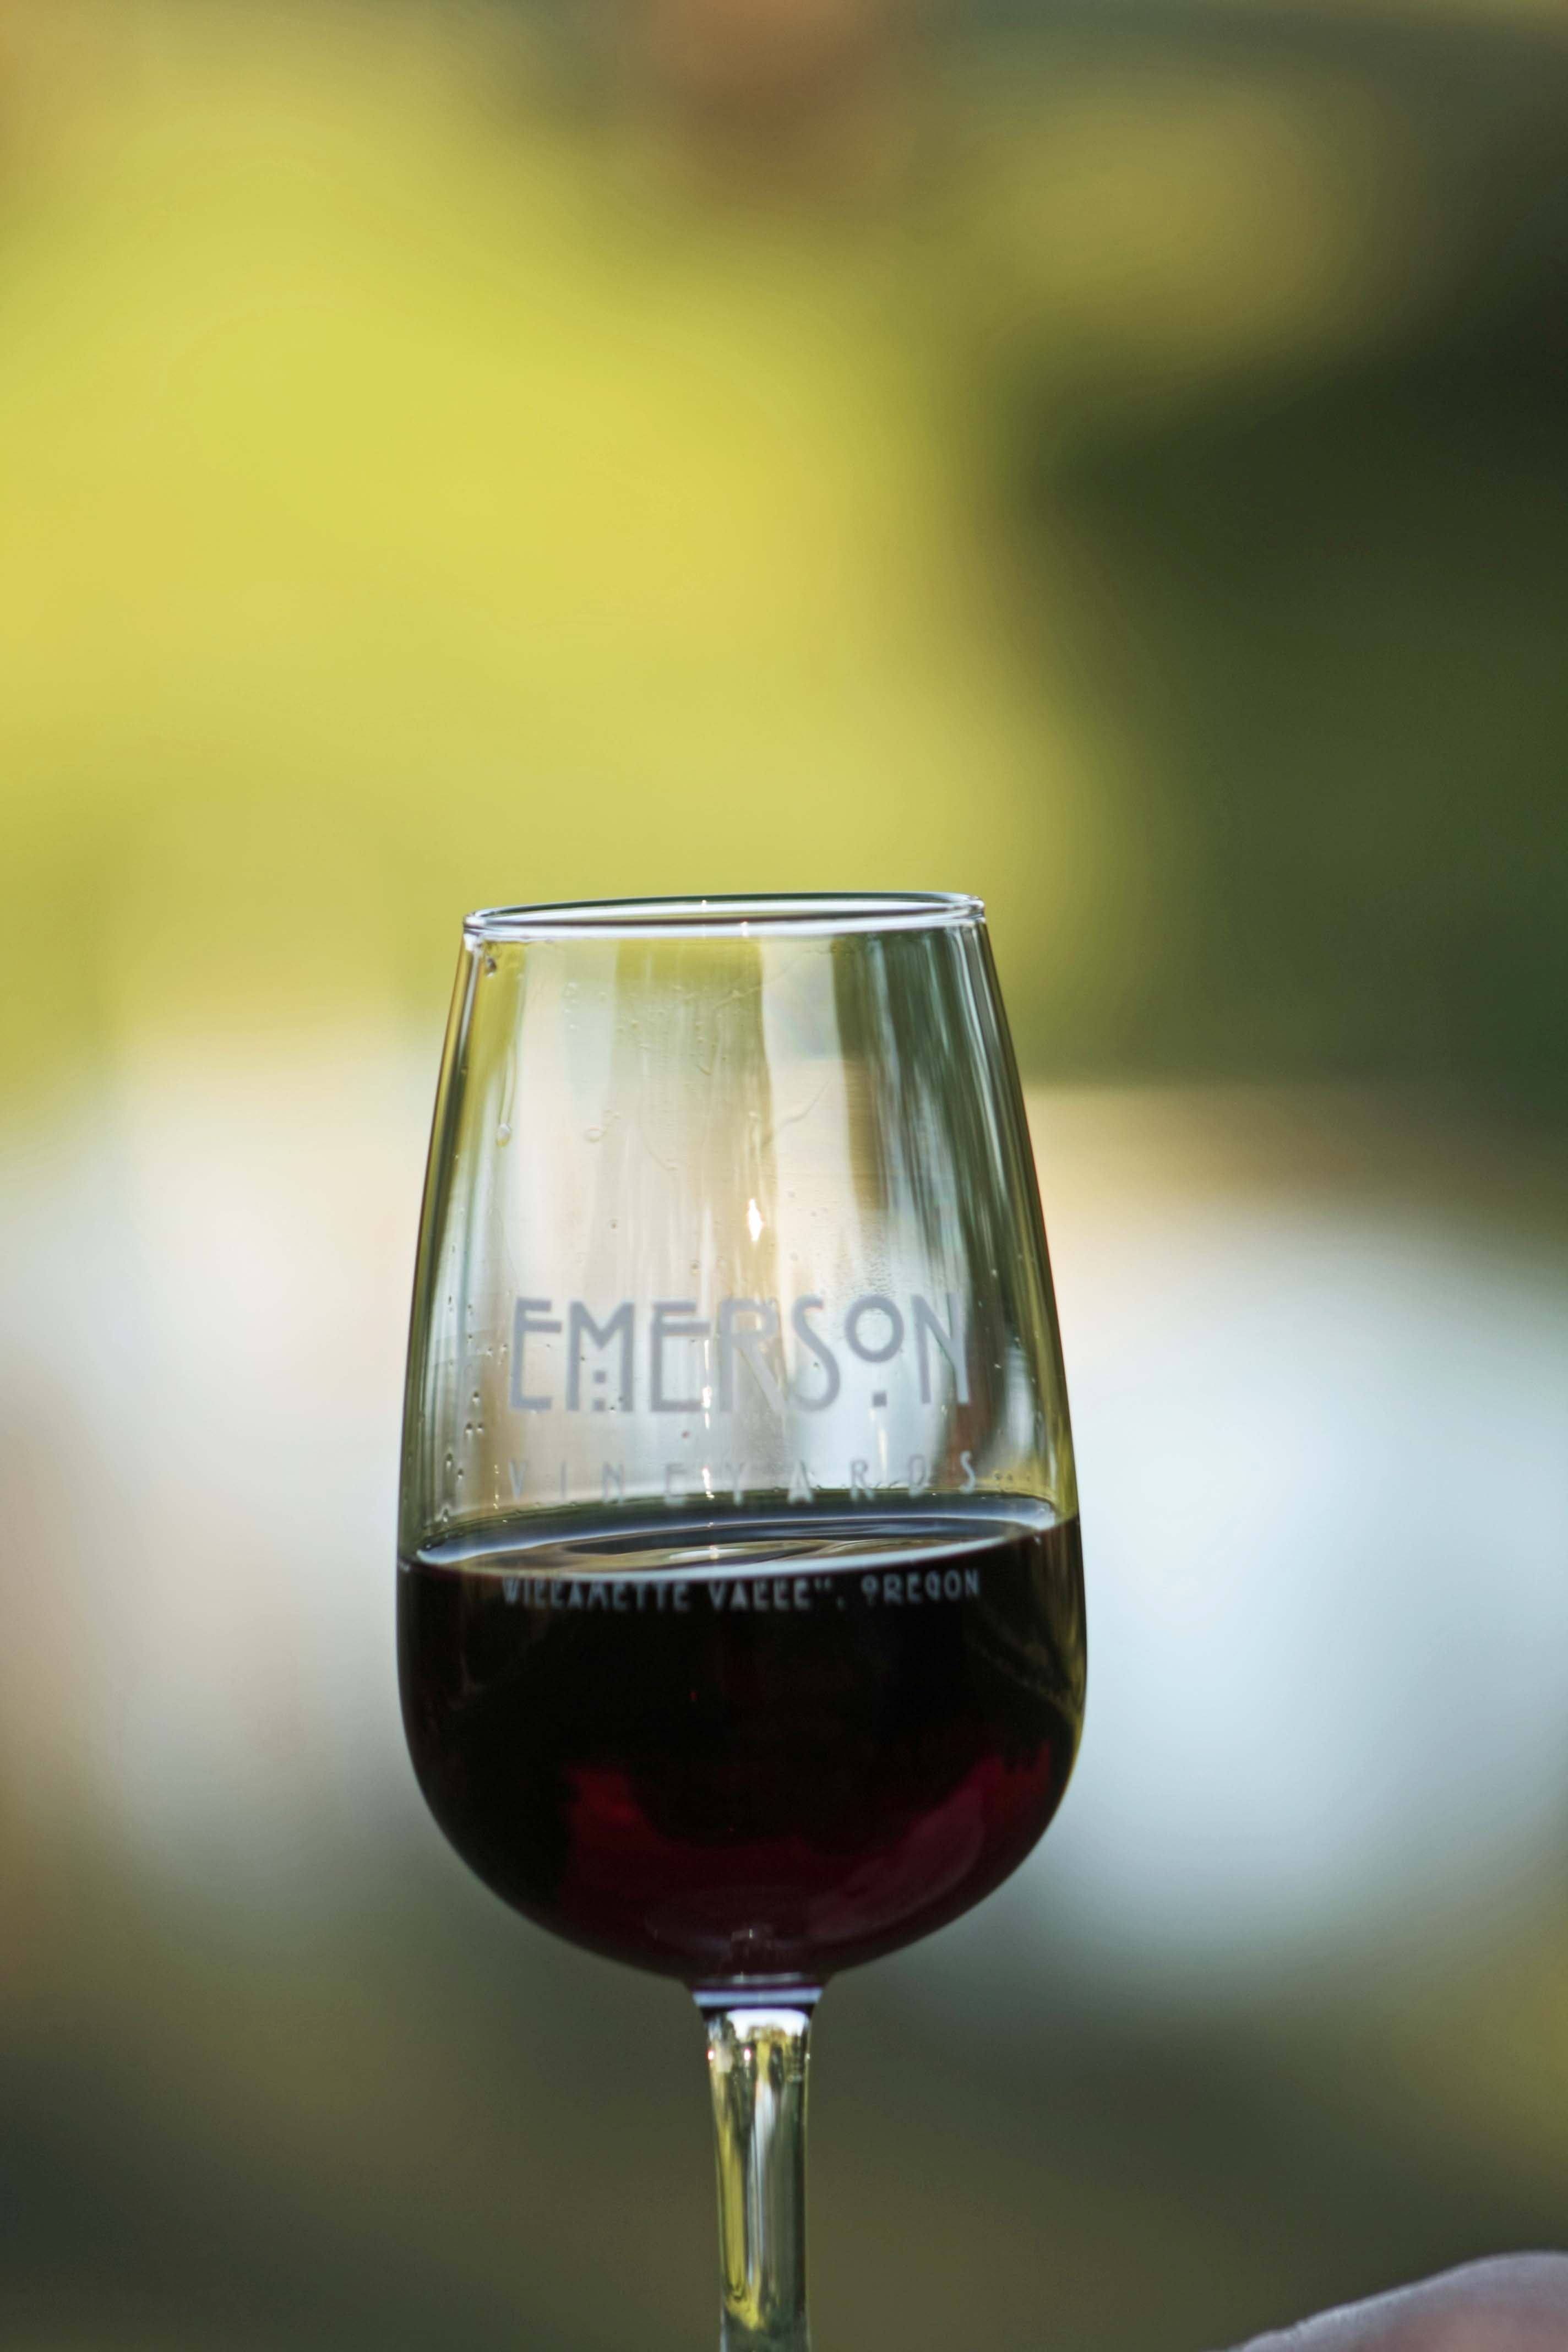 A glass of wine from Emerson Vineyards.